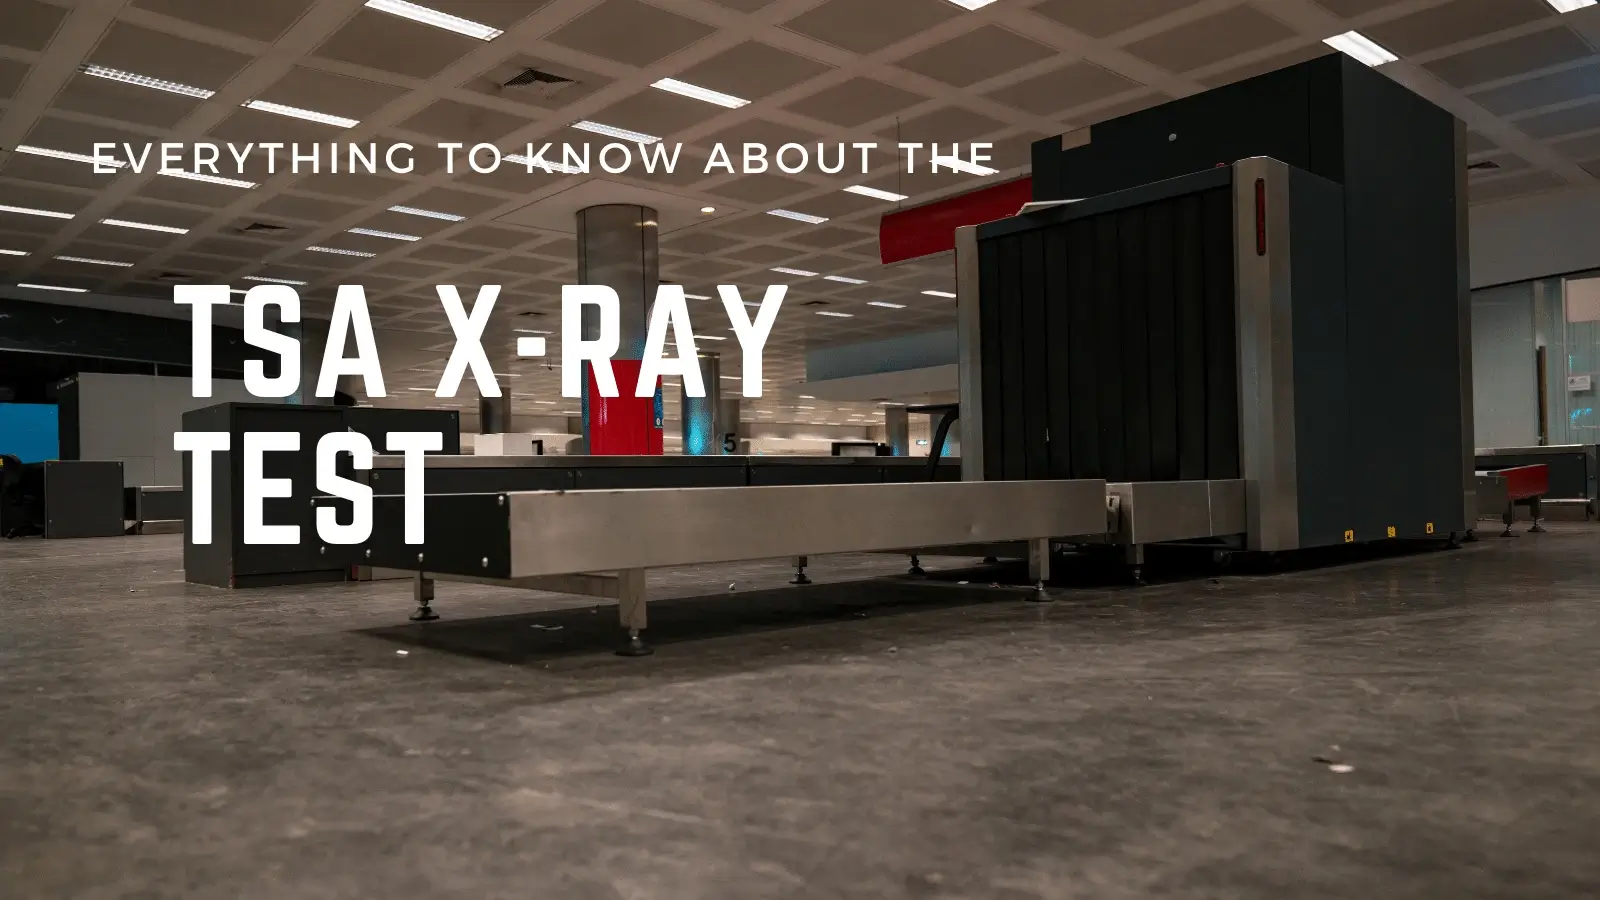 Everything-to-know-about-the-tsa-x-ray-test